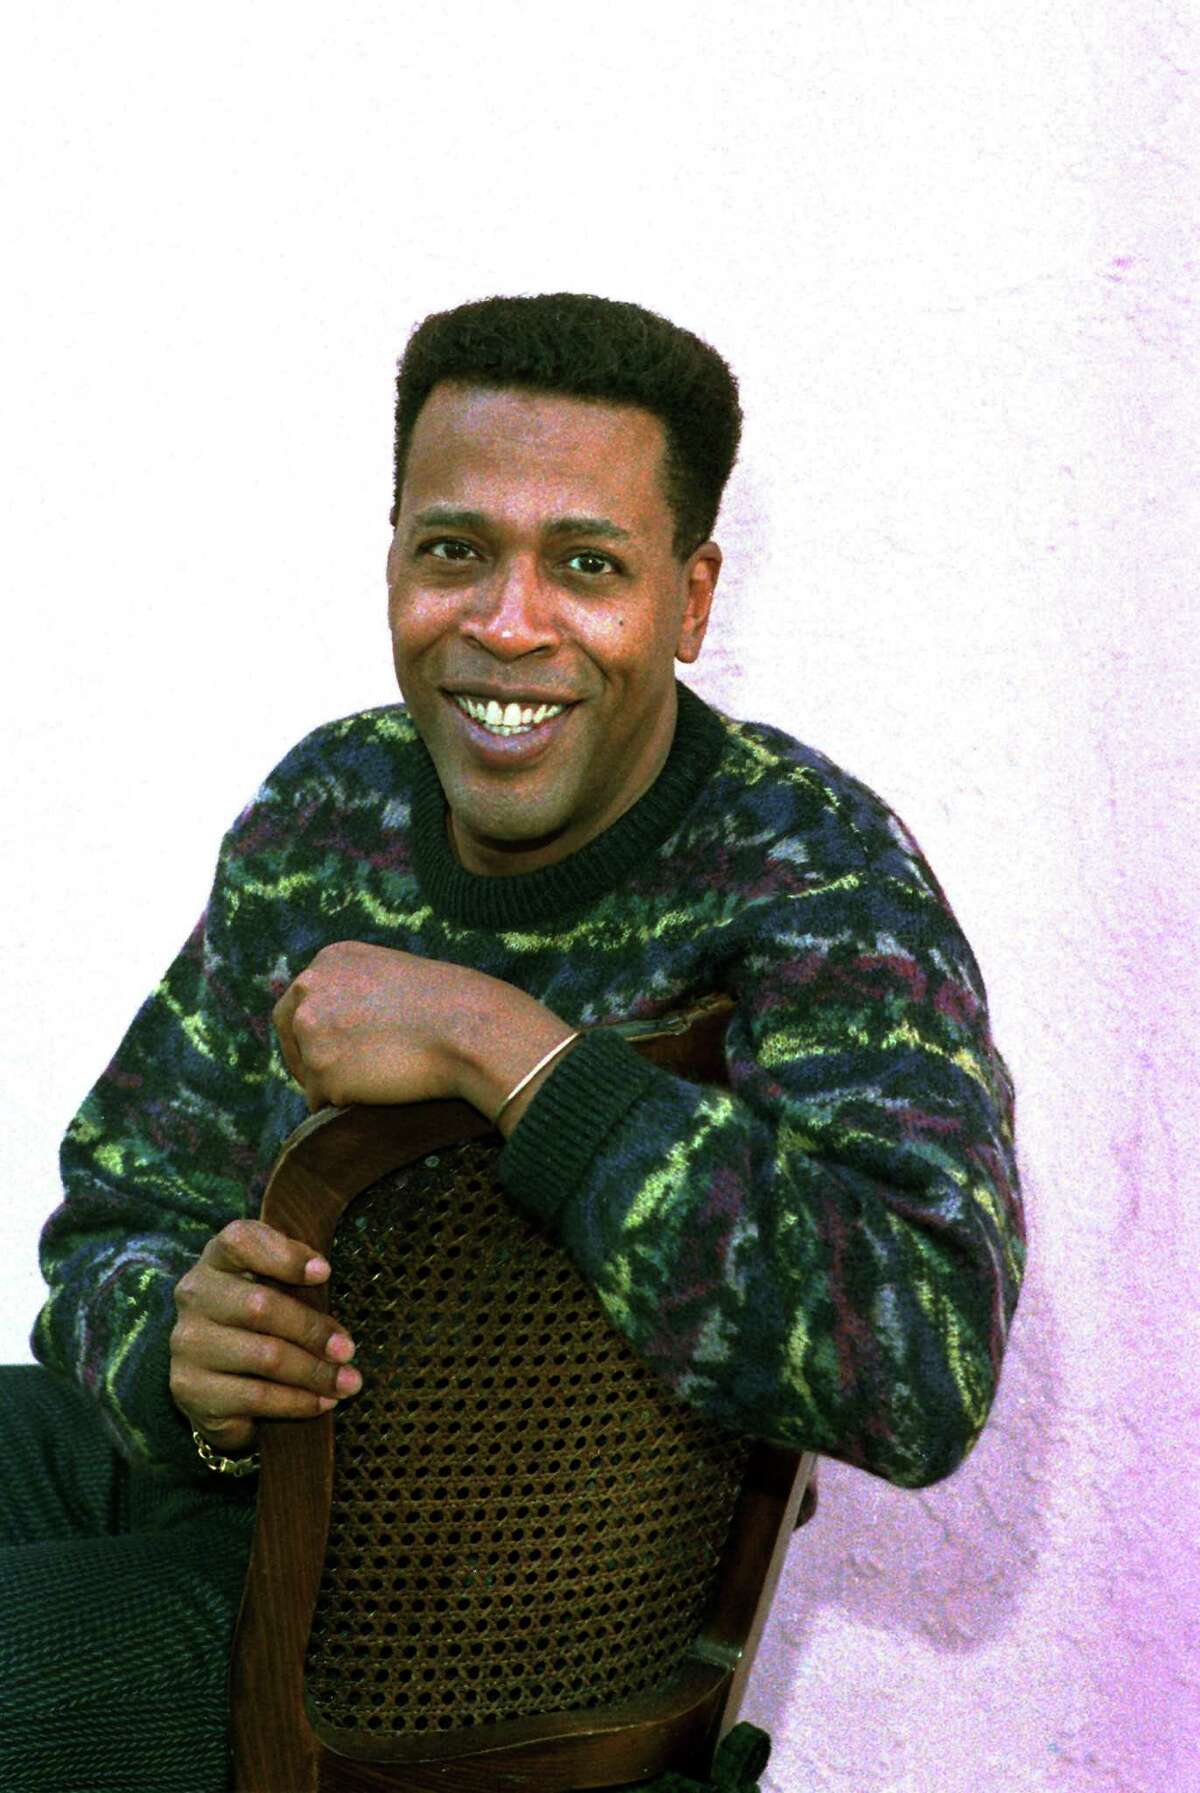 FILE - In this Jan. 30, 1989 file photo, actor Meshach Taylor poses during an interview in Los Angeles, Calif. Taylor's agent says the actor, who appeared in the hit sitcoms "Designing Women" and "Dave's World" died of cancer on Saturday, June 28, 2014, at his home in Los Angeles. He was 67. (AP Photo/Nick Ut, File)